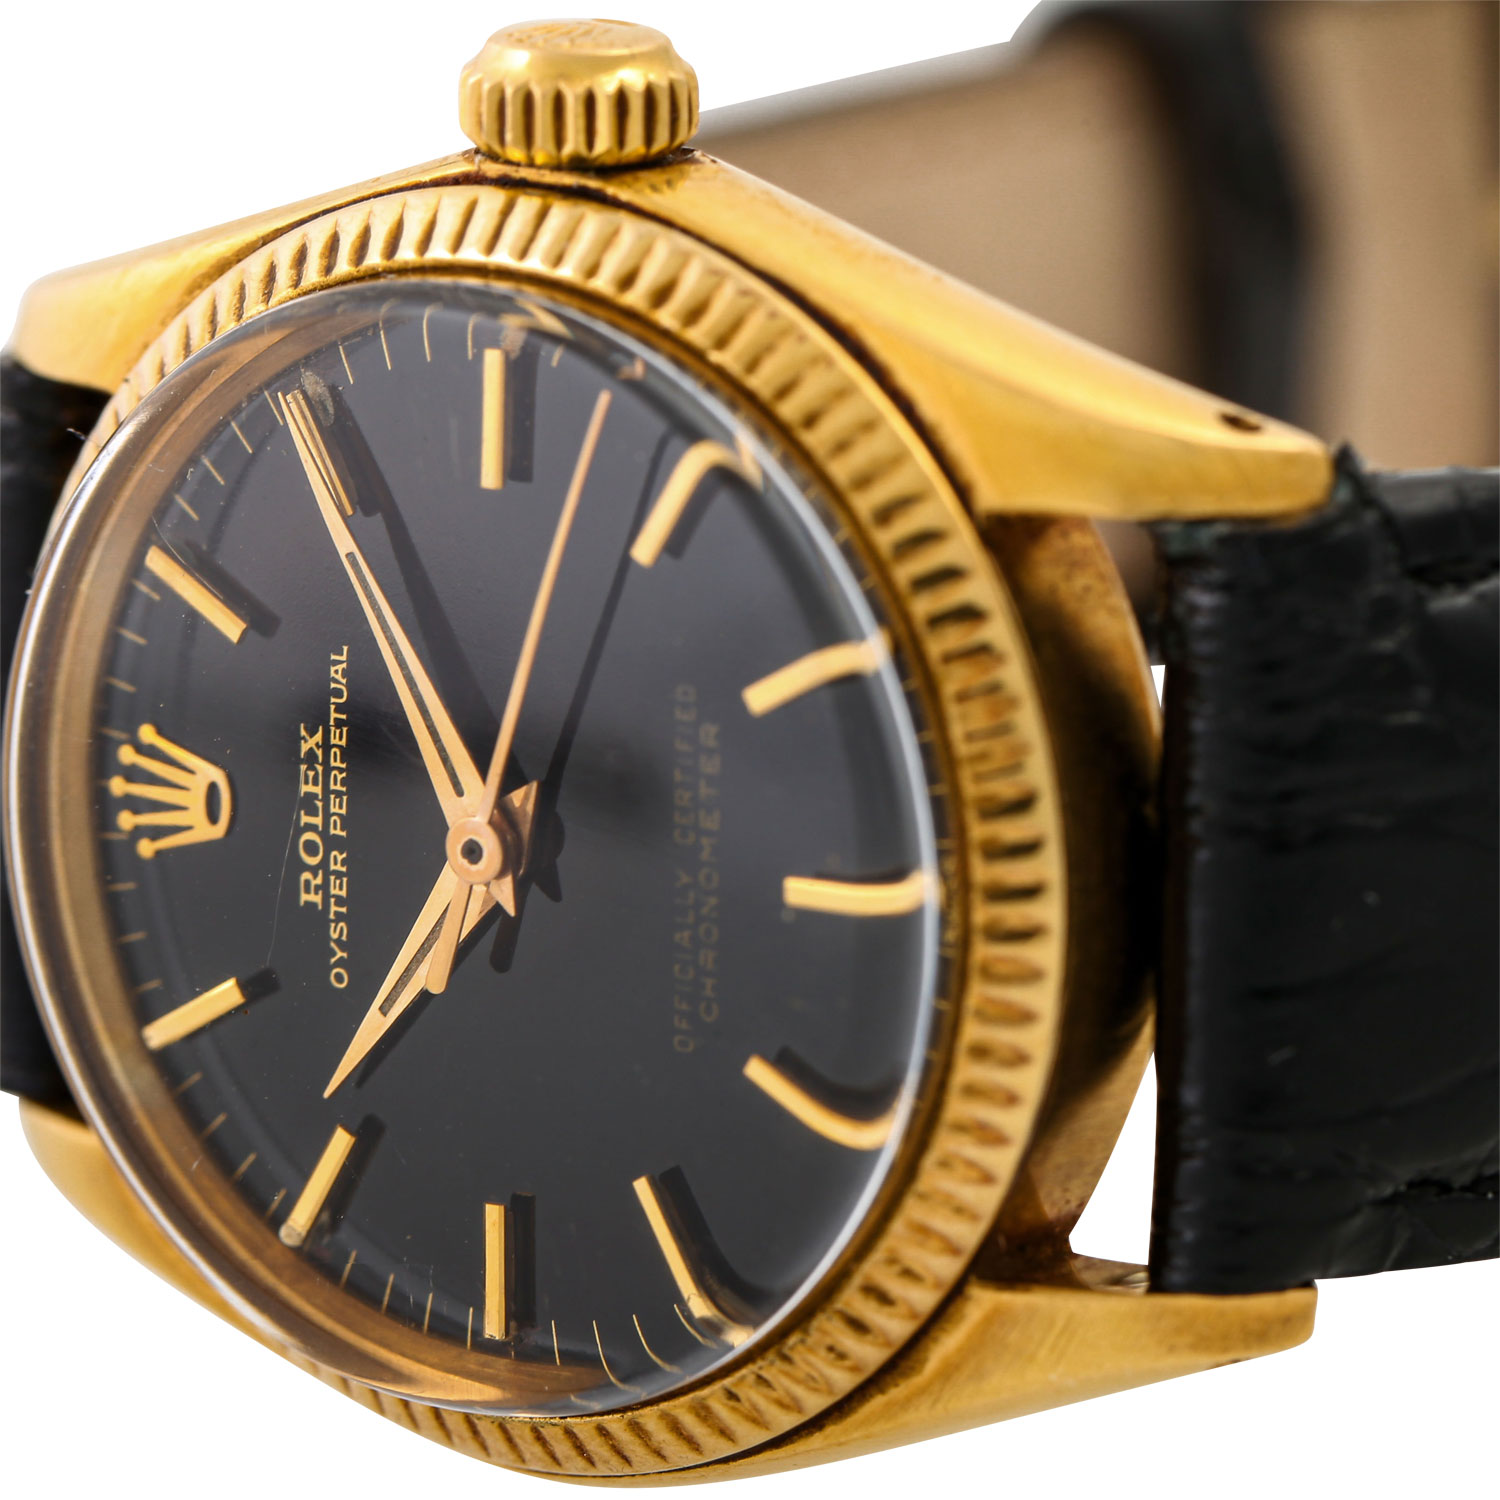 ROLEX Vintage Oyster Perpetual. Armbanduhr. - Image 6 of 8